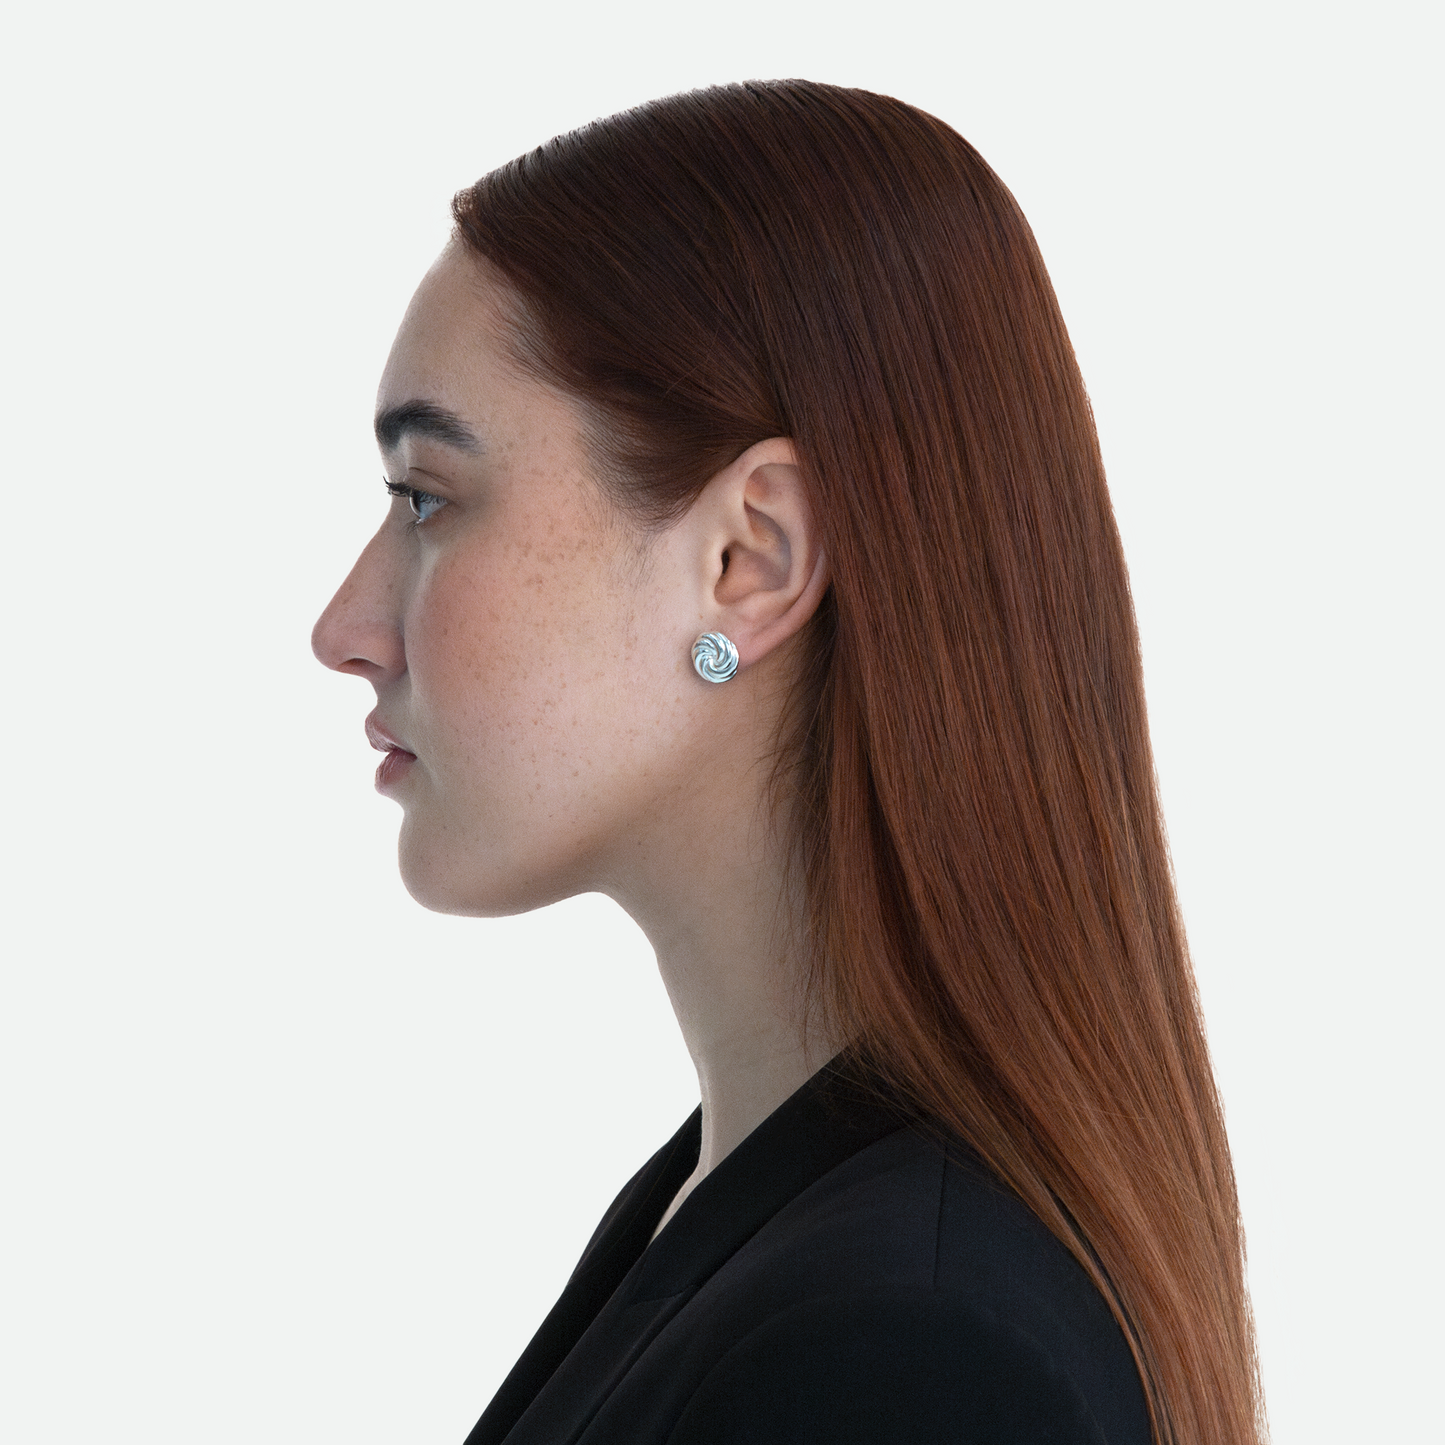 Side profile of model wearing the Silver Vortex earring, highlighting the understated design of twin silver whorls, on a white background.